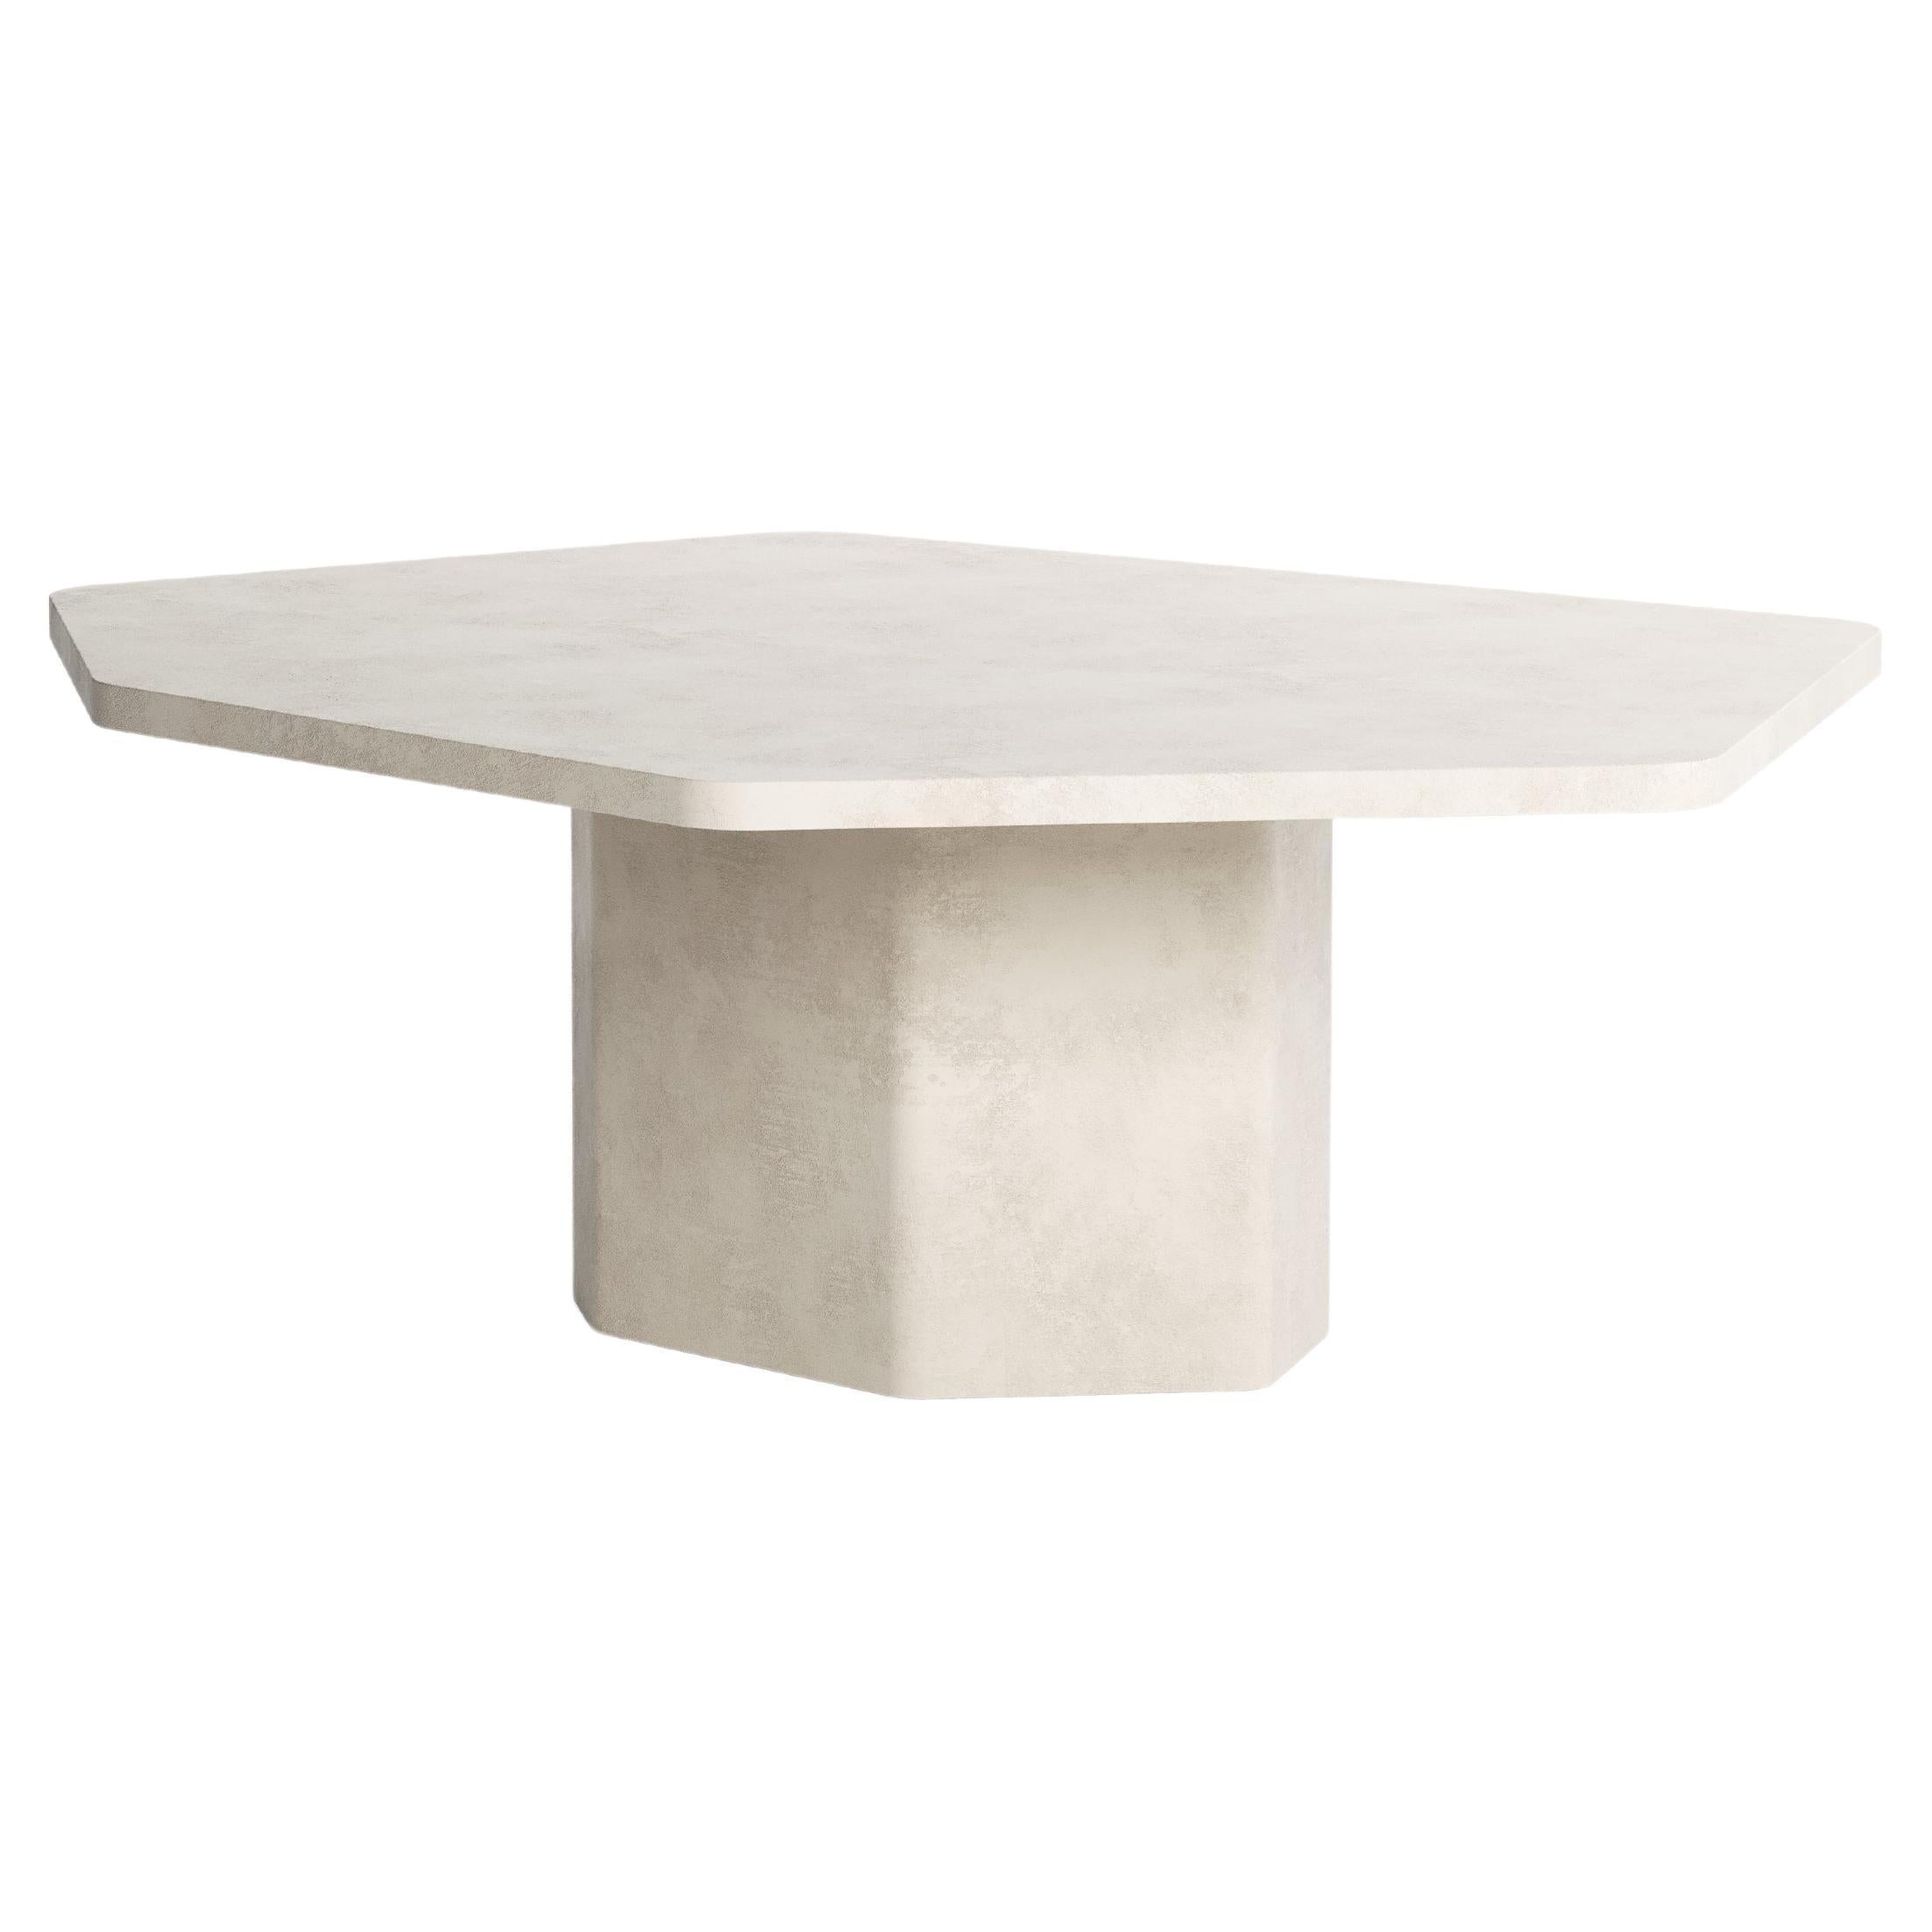 Contemporary Beige Palmer 217 cm long Dining Table by Armand & Francine For Sale